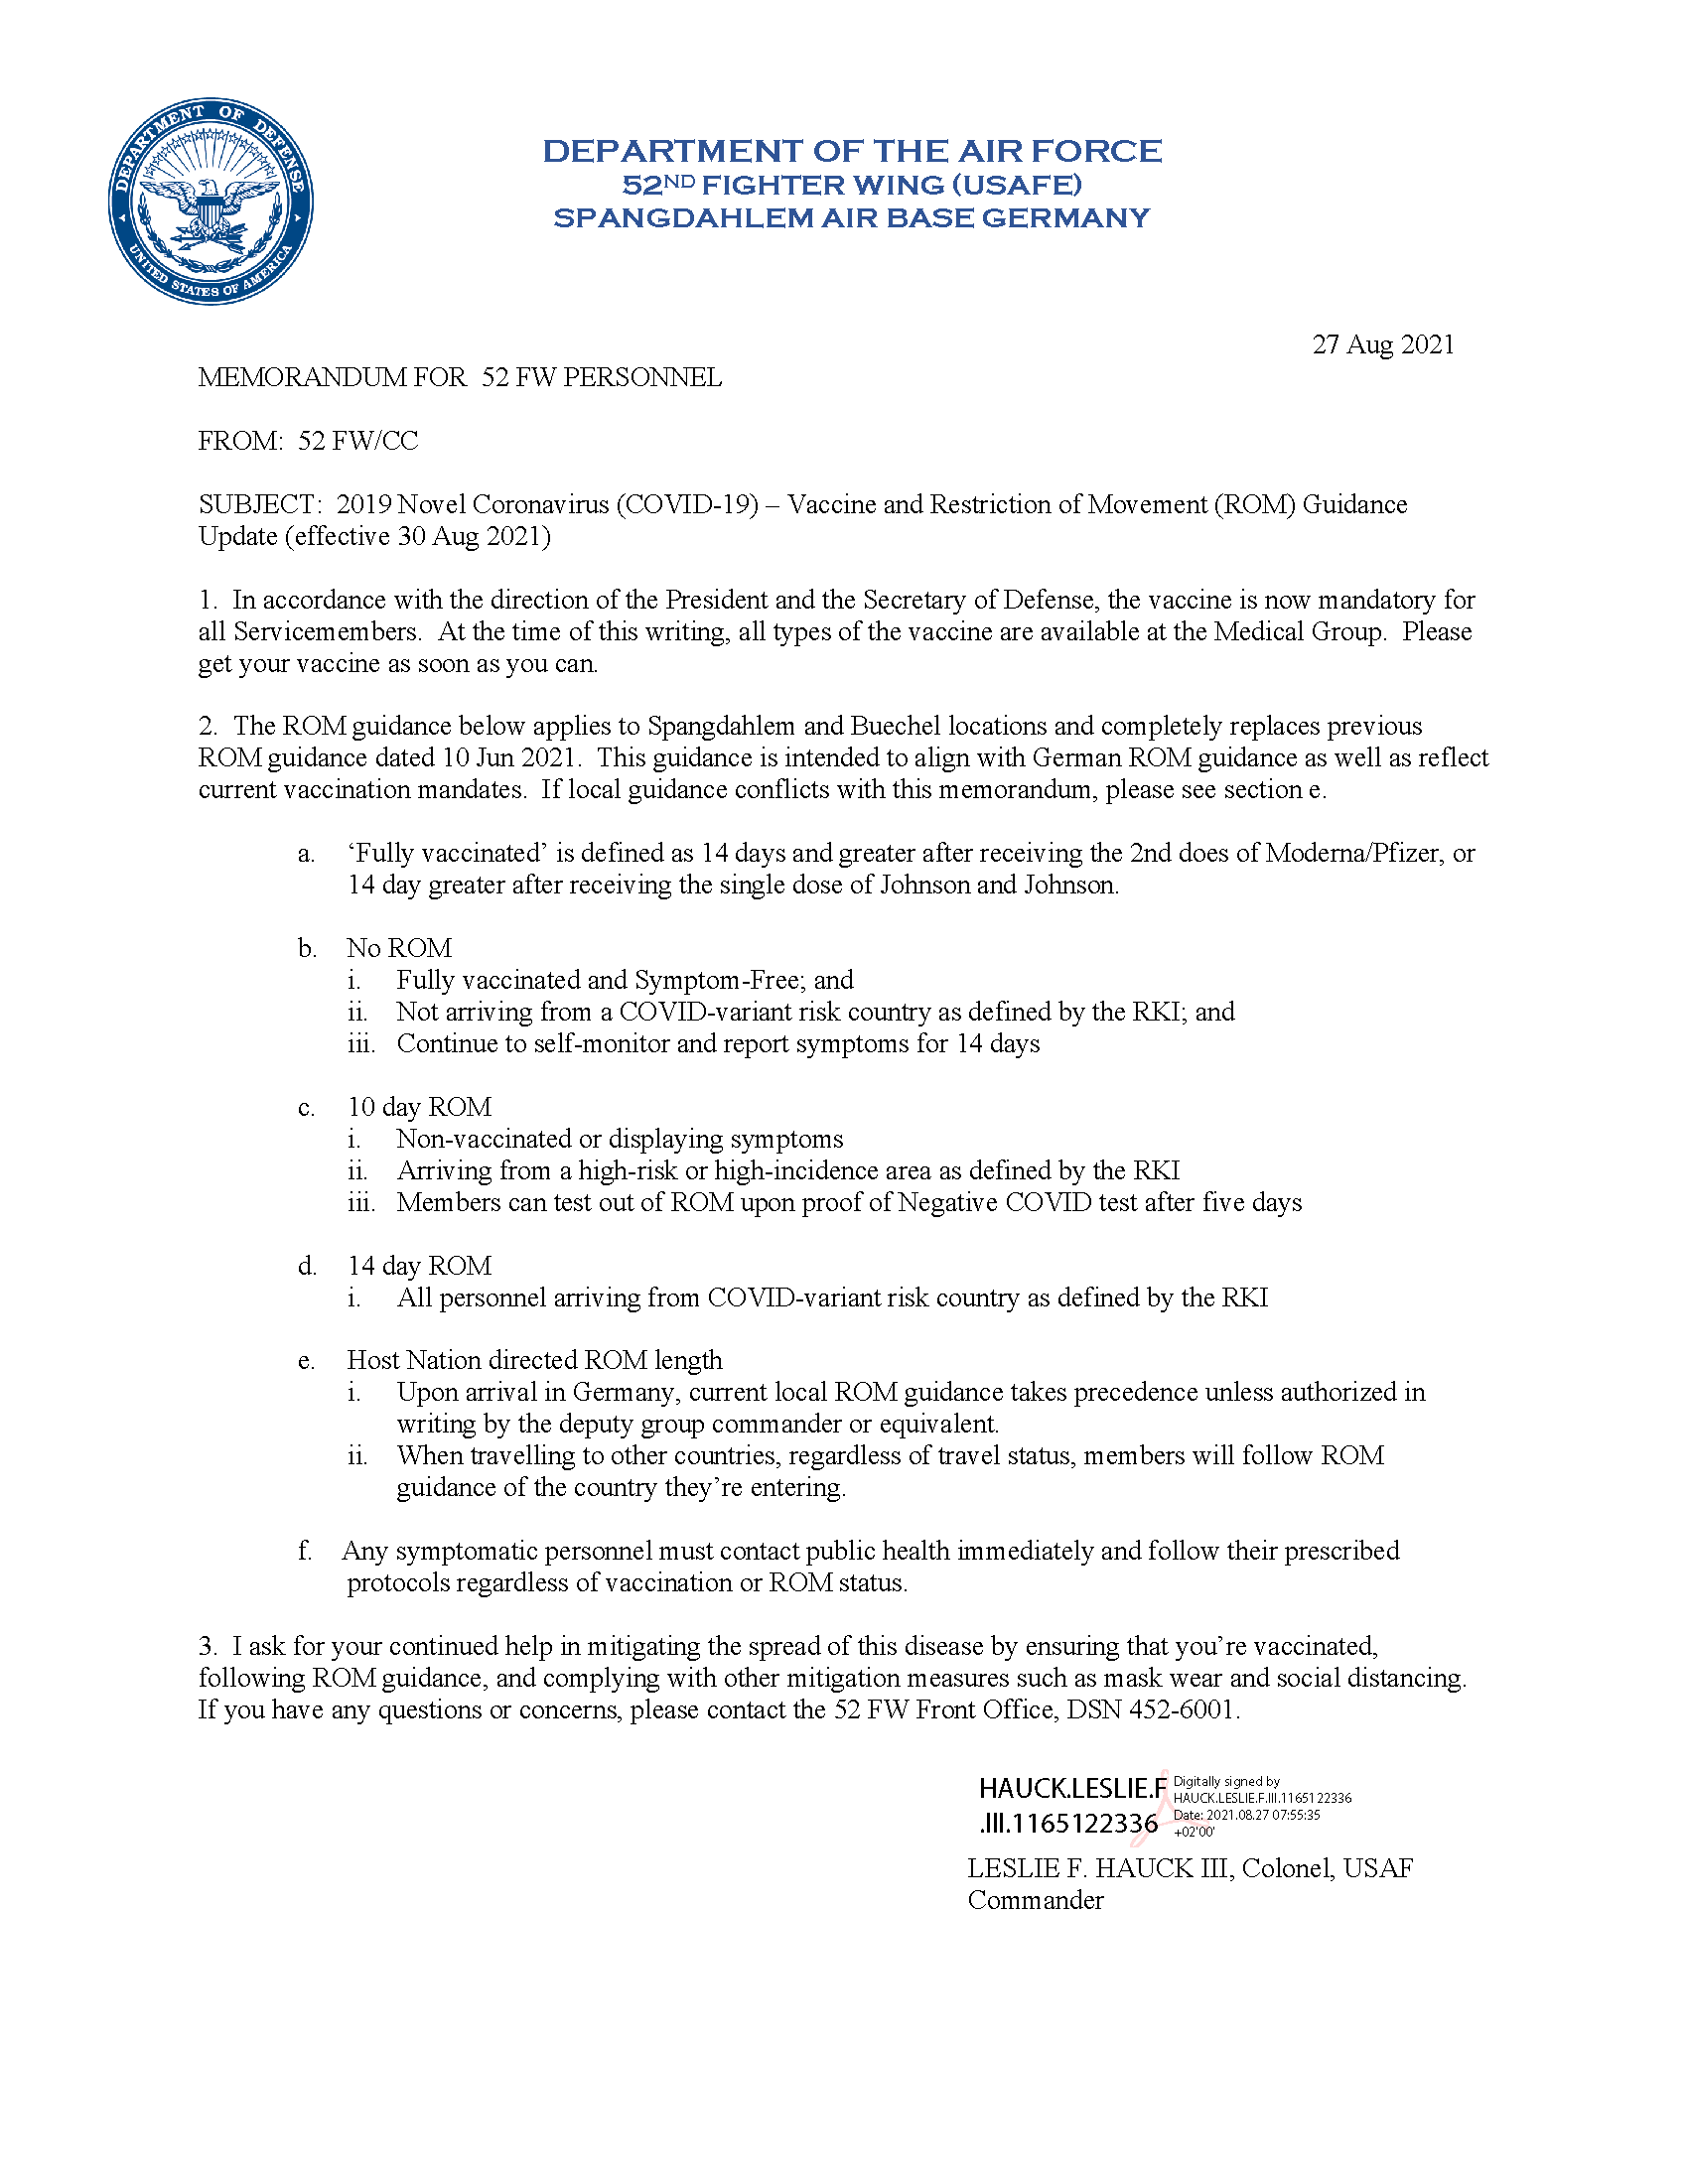 A link the 52nd Fighter Wing restriction of movement policy